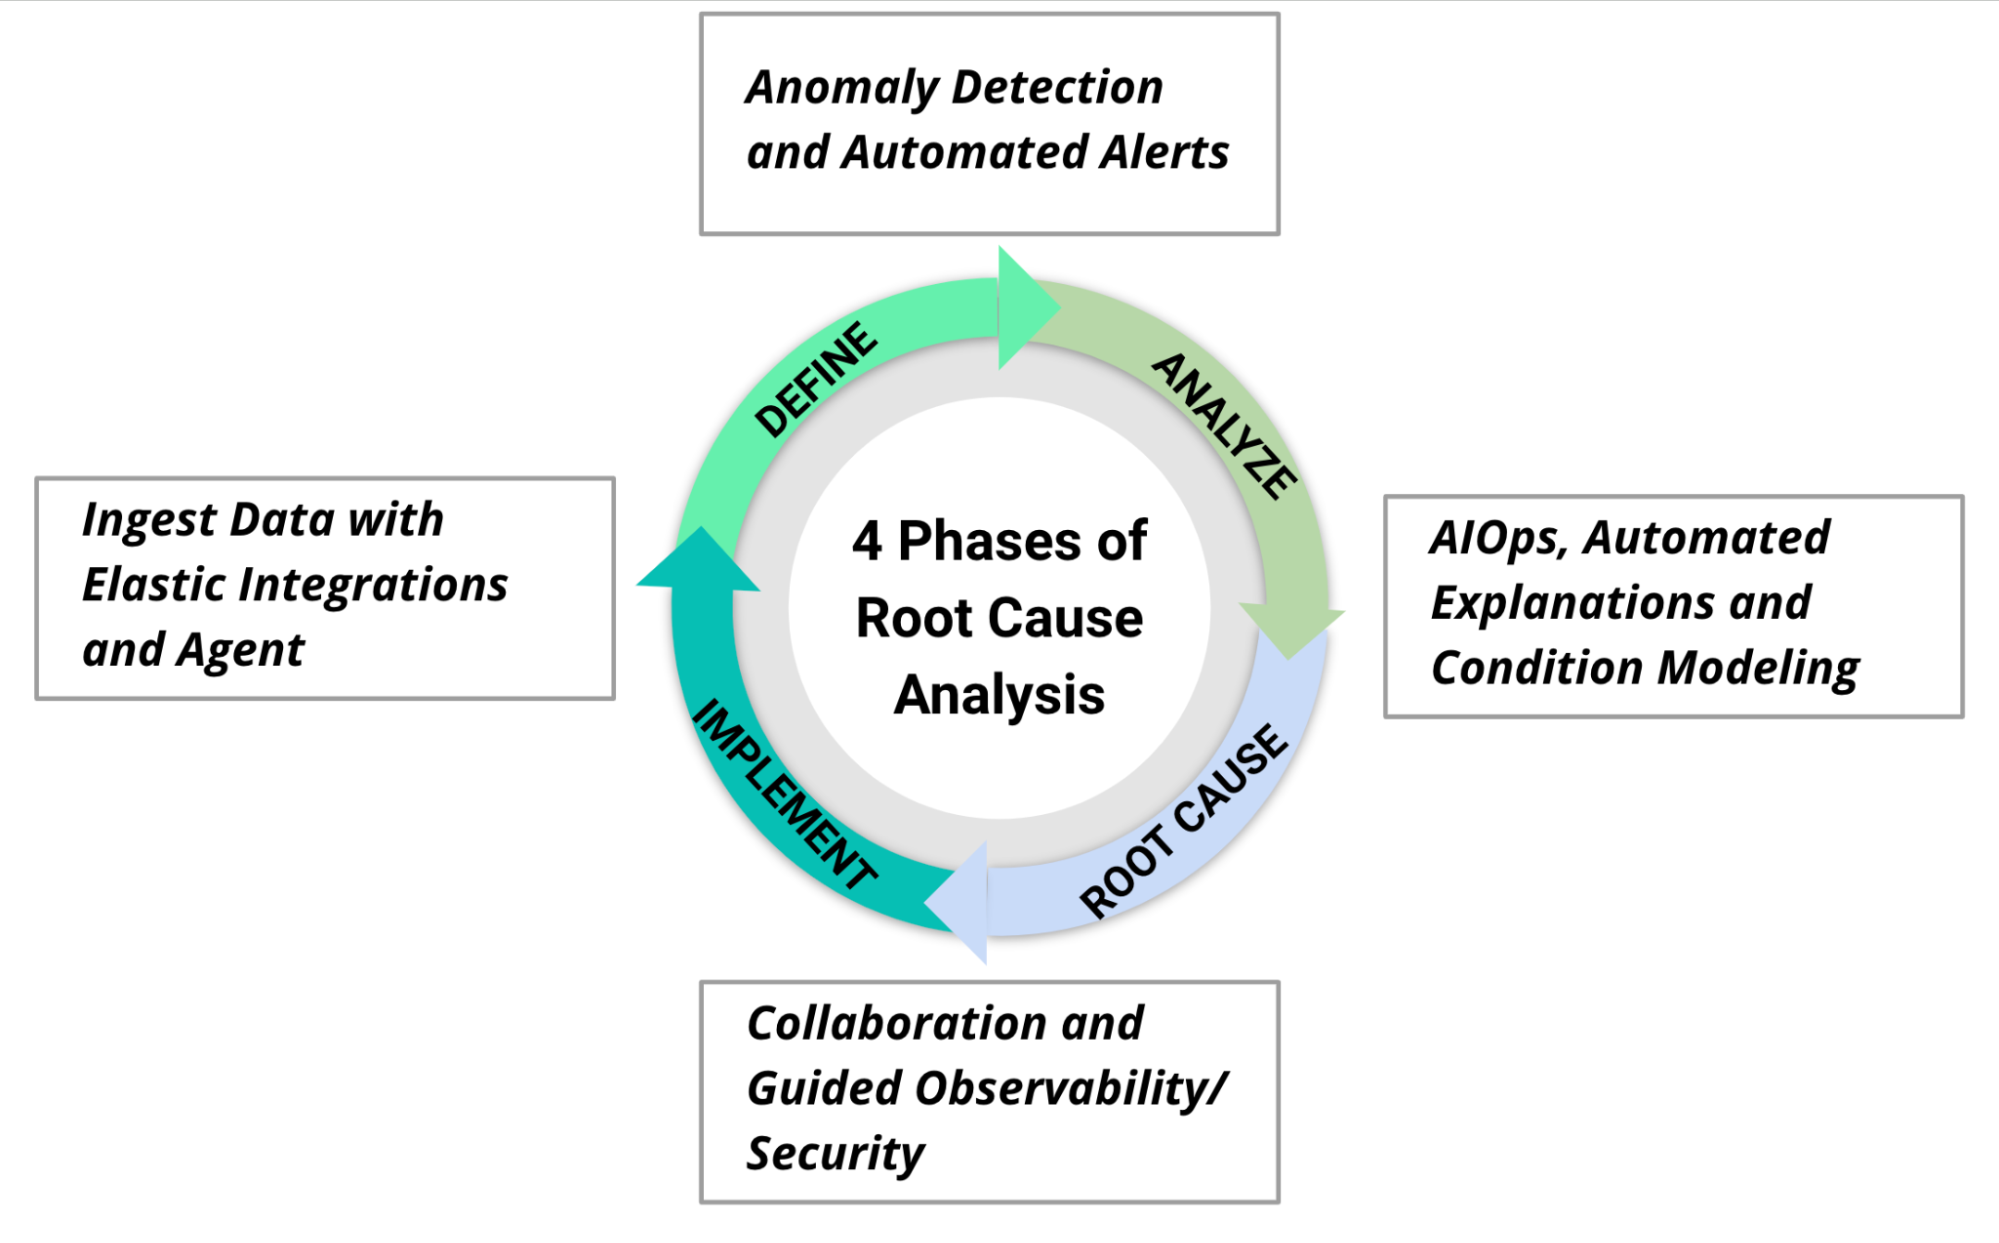 4 Phases of Root Cause Analysis